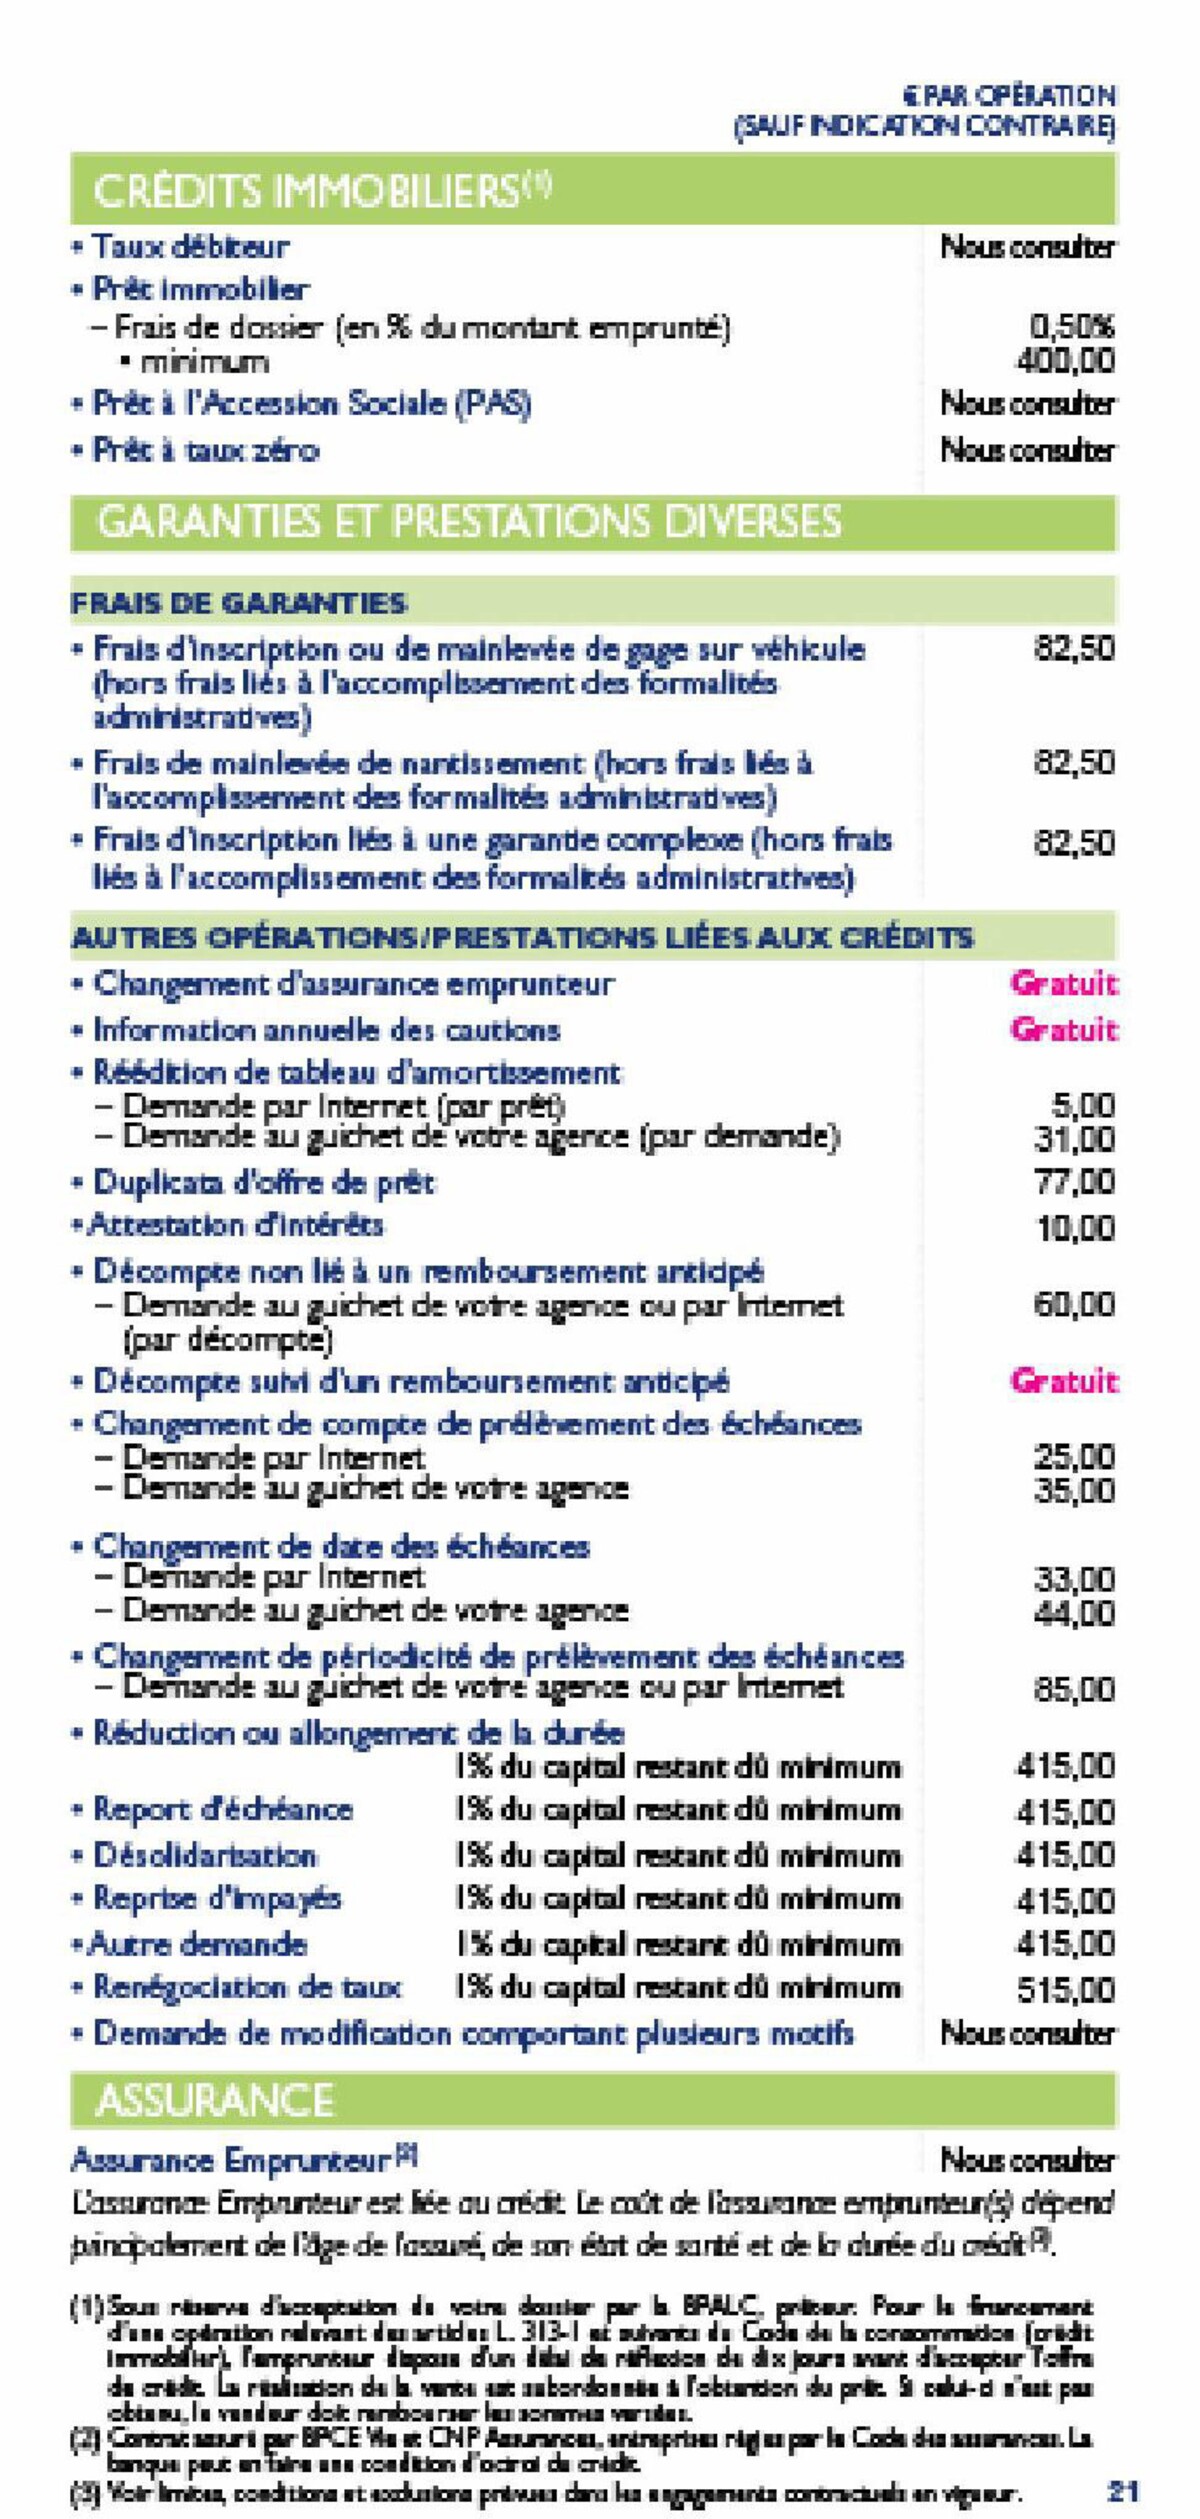 Catalogue Bpalc tarifs particuliers , page 00021